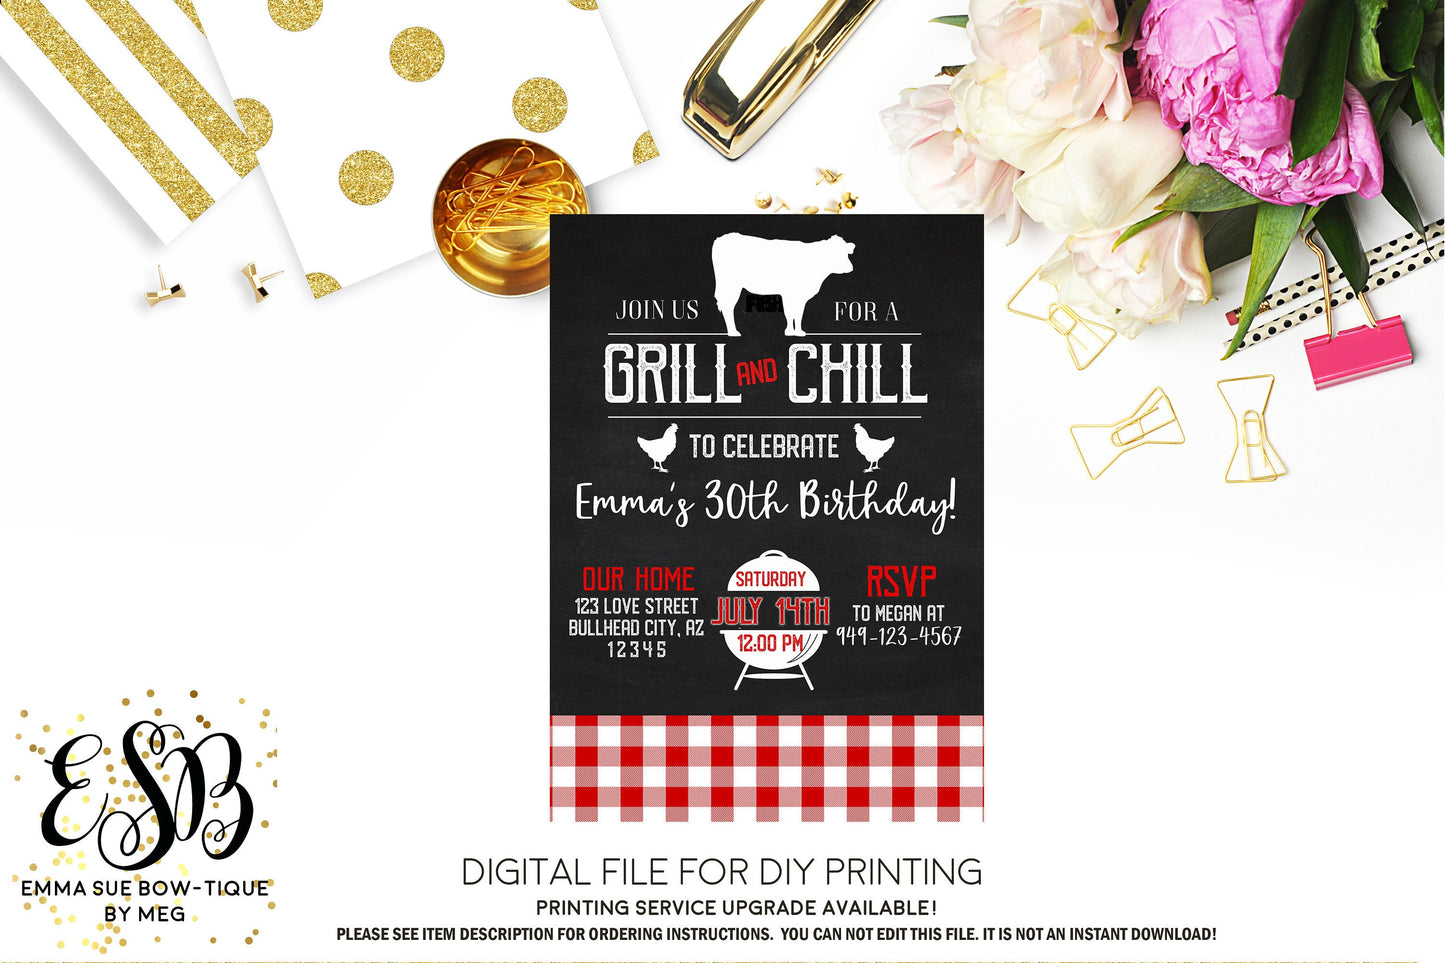 Grill & Chill - BBQ Adult Birthday Party Invitation Printable - Digital File  (Grill-Chill)